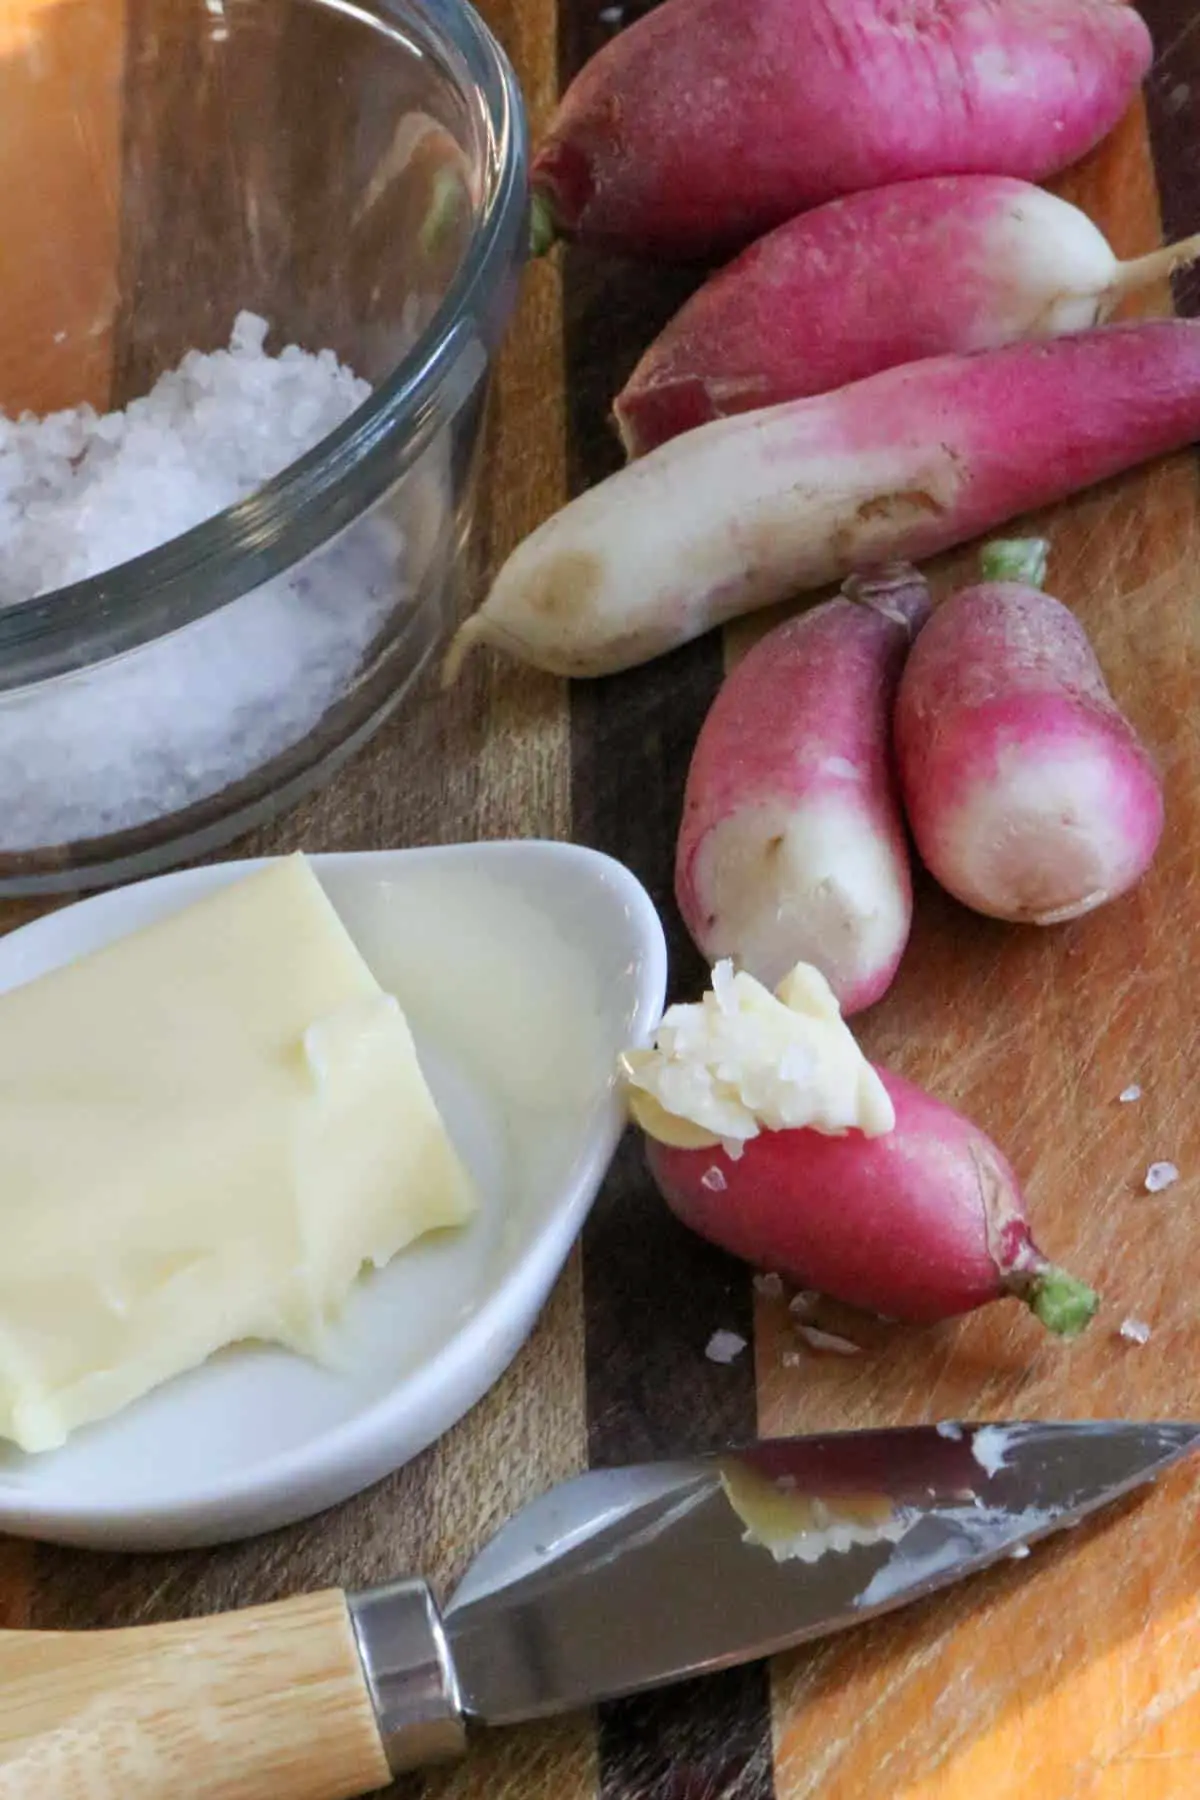 Several French breakfast radishes on a wooden cutting board with a glass bowl with sea salt in the background, a white dish with butter on the left side, and a cheese knife with wooden handle in the foreground.